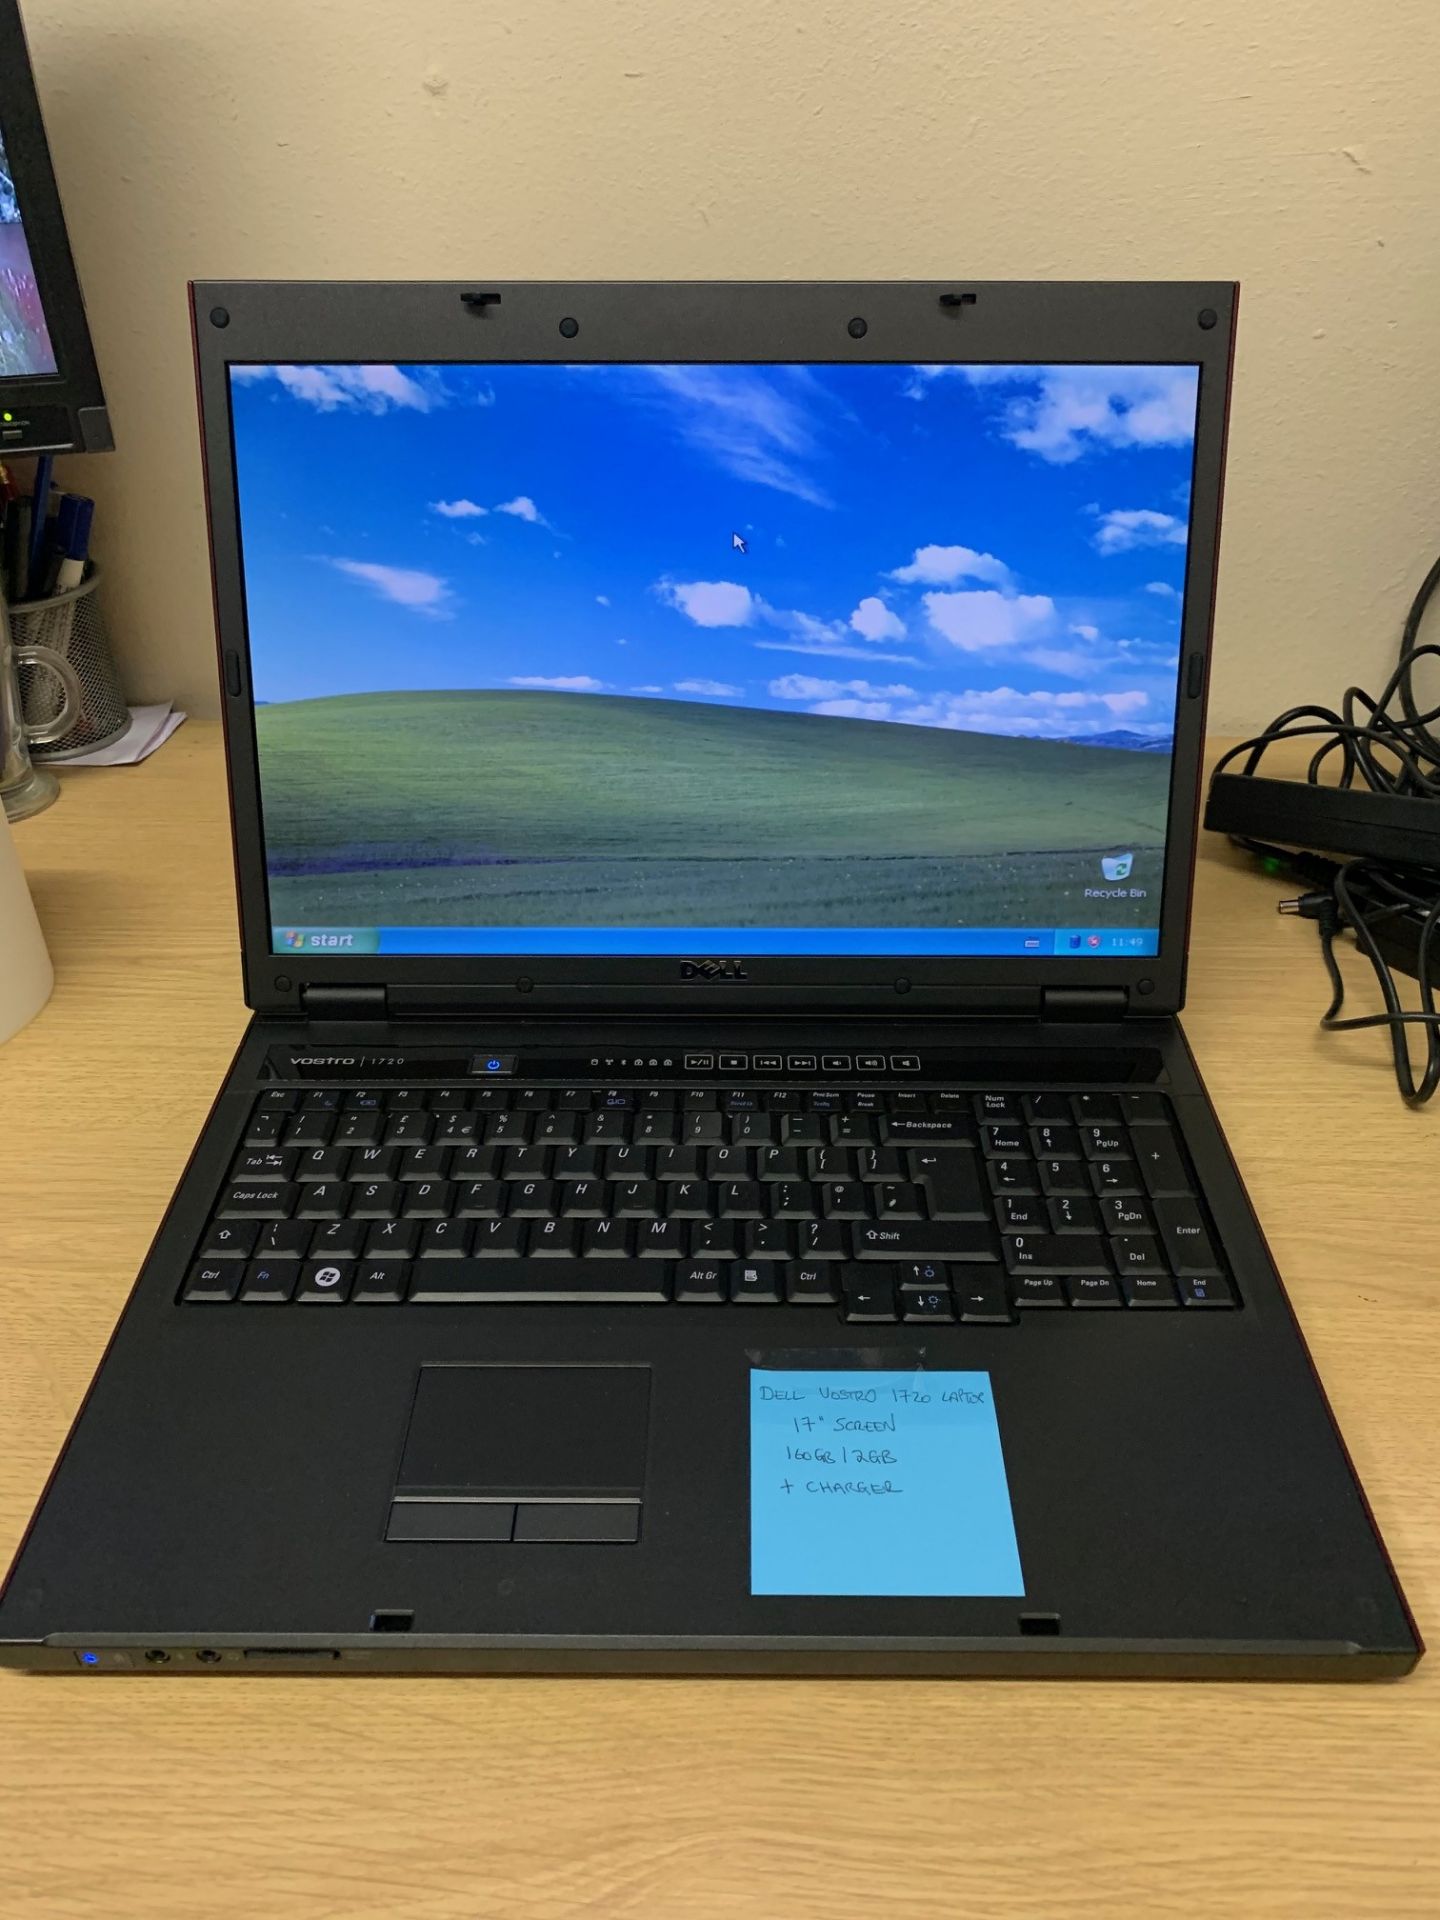 Dell Vostro 1720 Laptop - 160GB Hard Drive, 2GB RAM, 17" Screen, Loaded With Windows XP & Complete